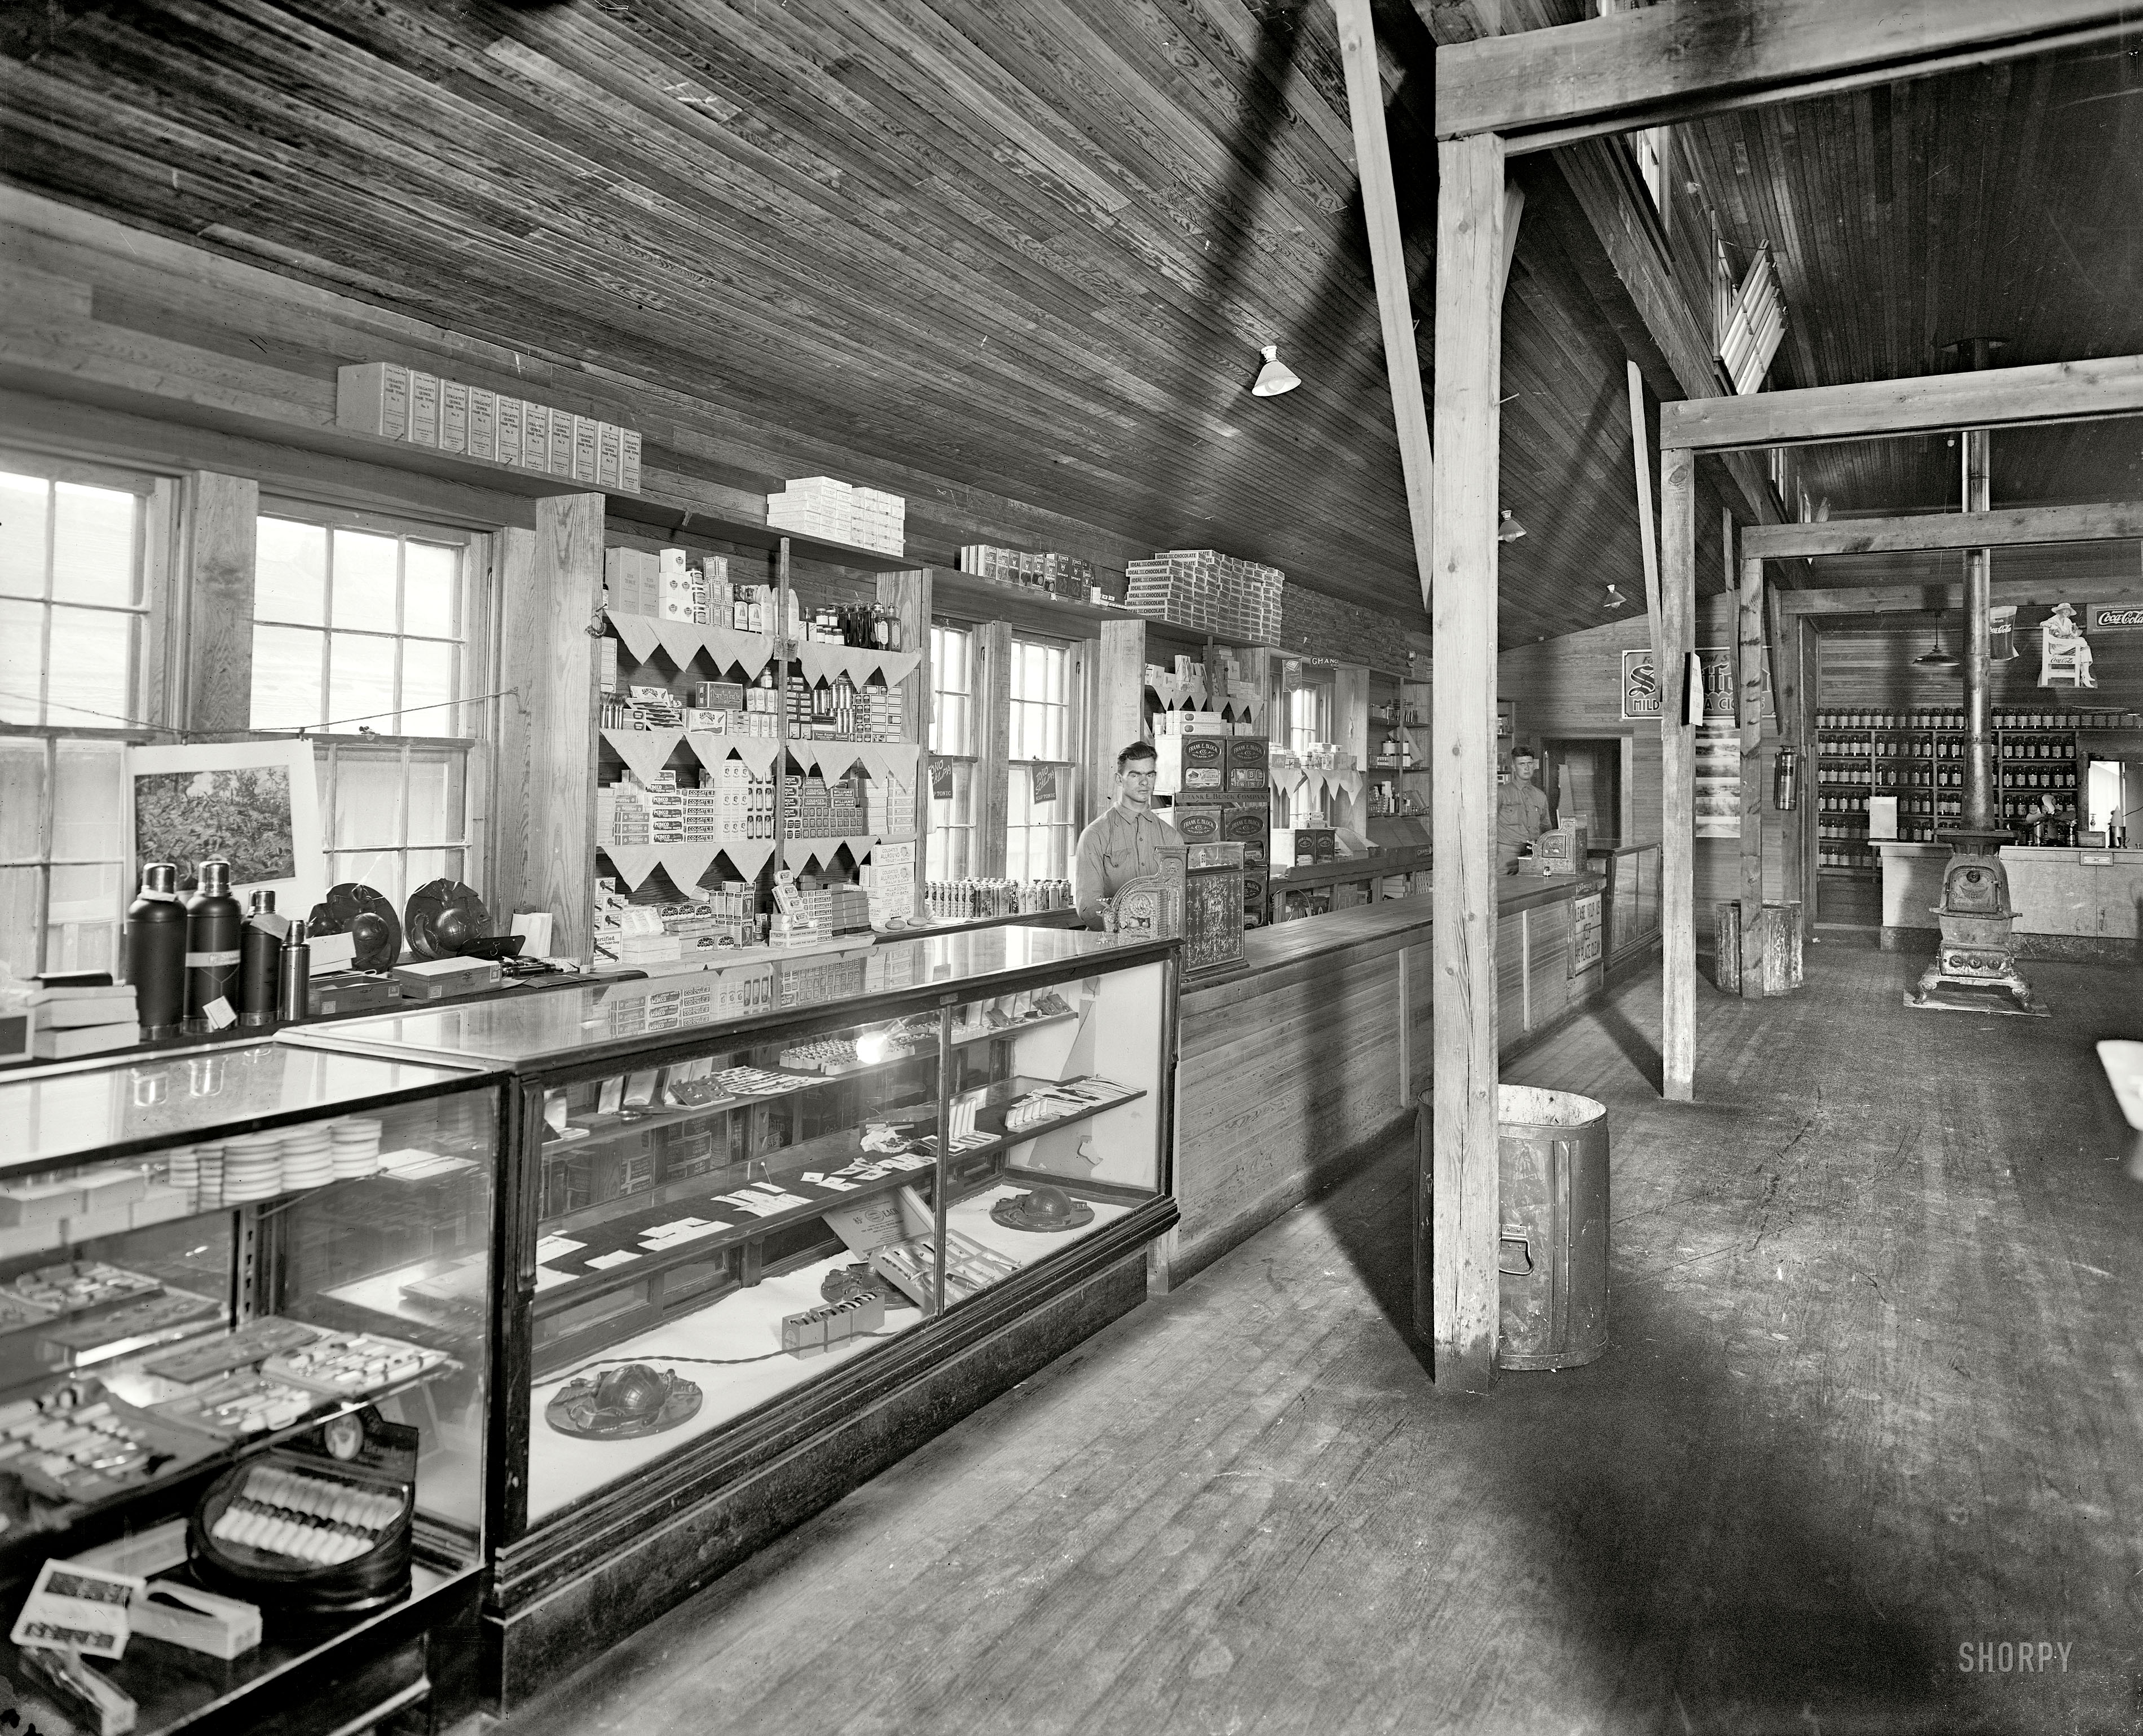 Quantico, Virginia, circa 1920. "Quantico Post Exchange." The other side of the PX seen earlier. Harris & Ewing Collection glass negative. View full size.